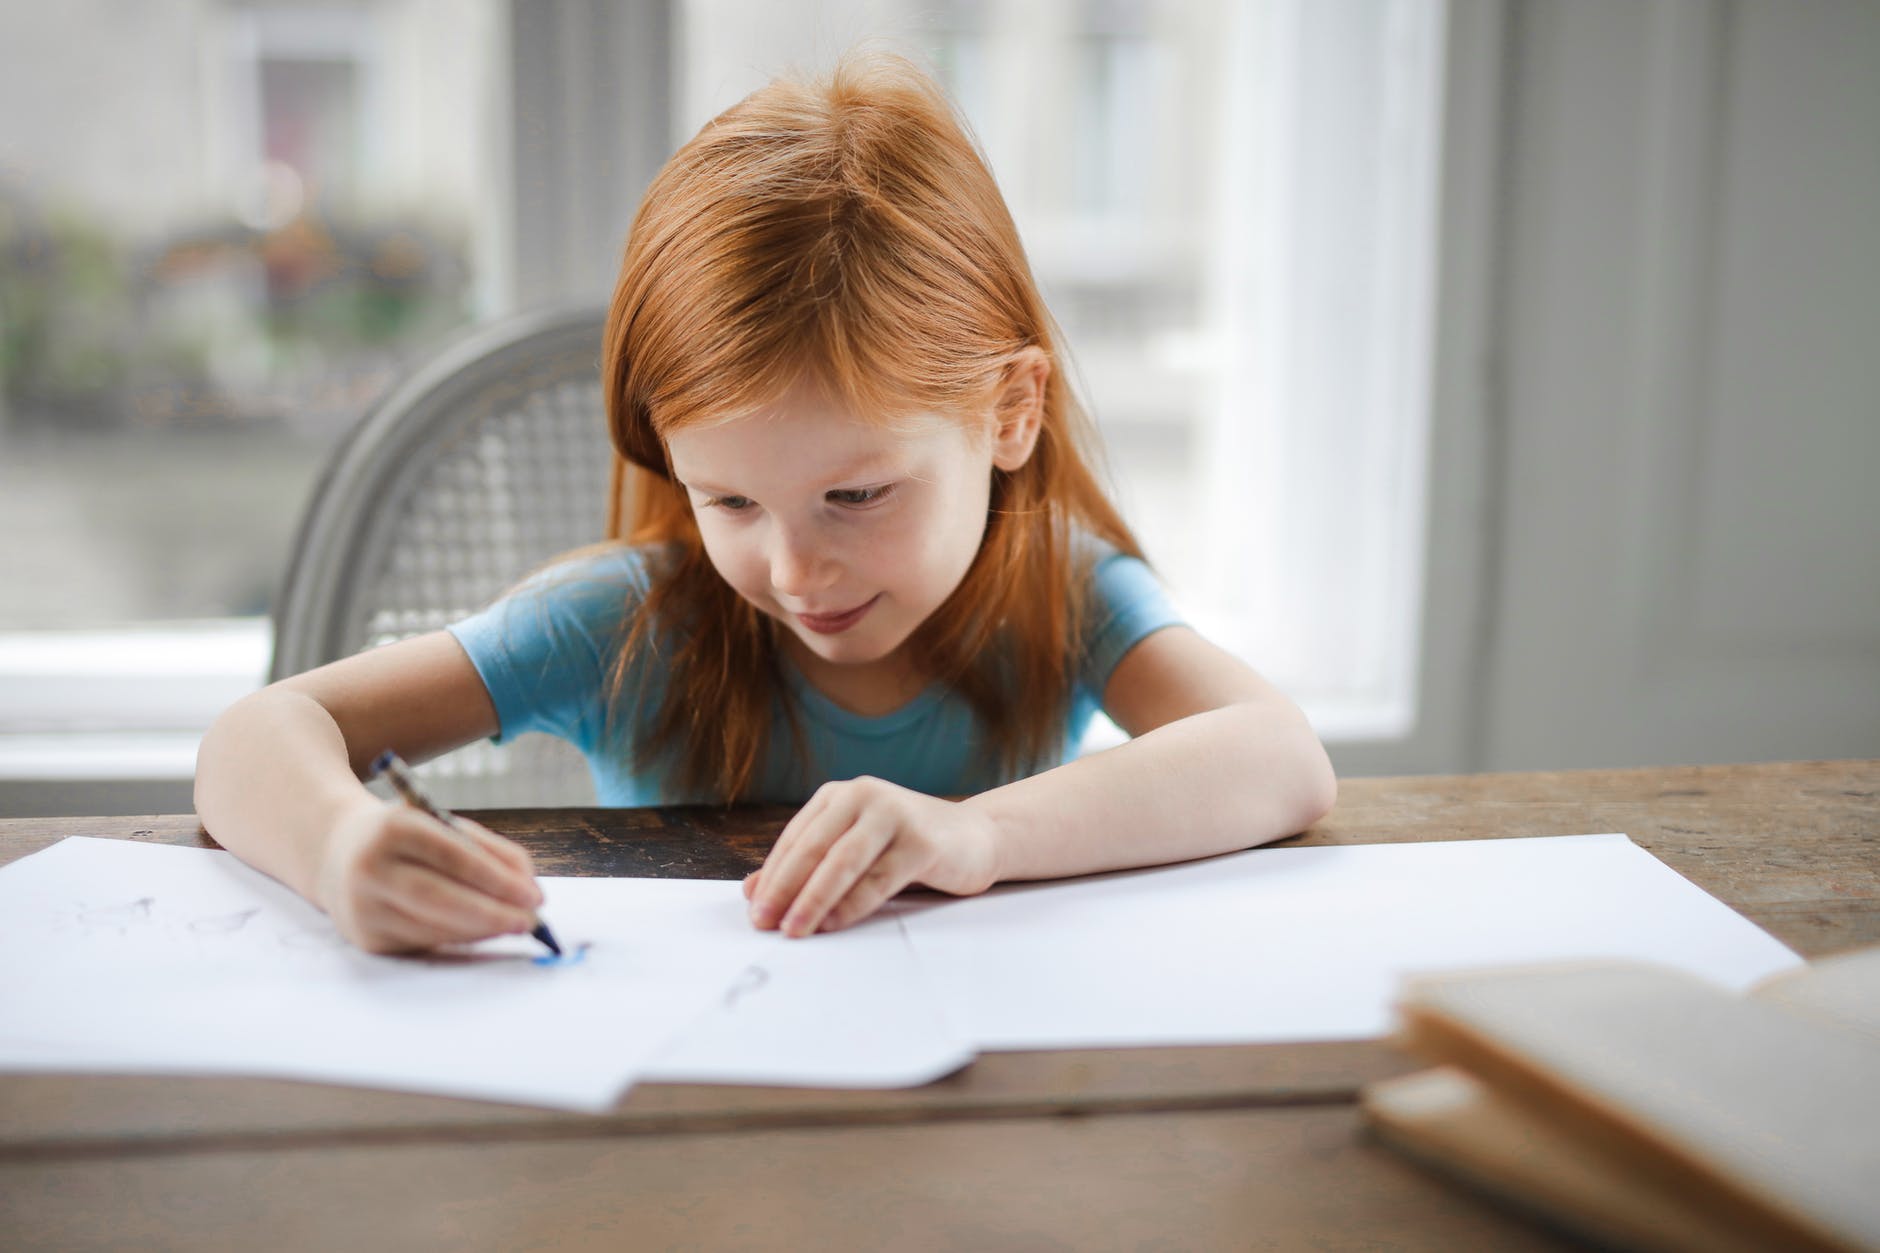 diligent small girl drawing on paper in light living room at home